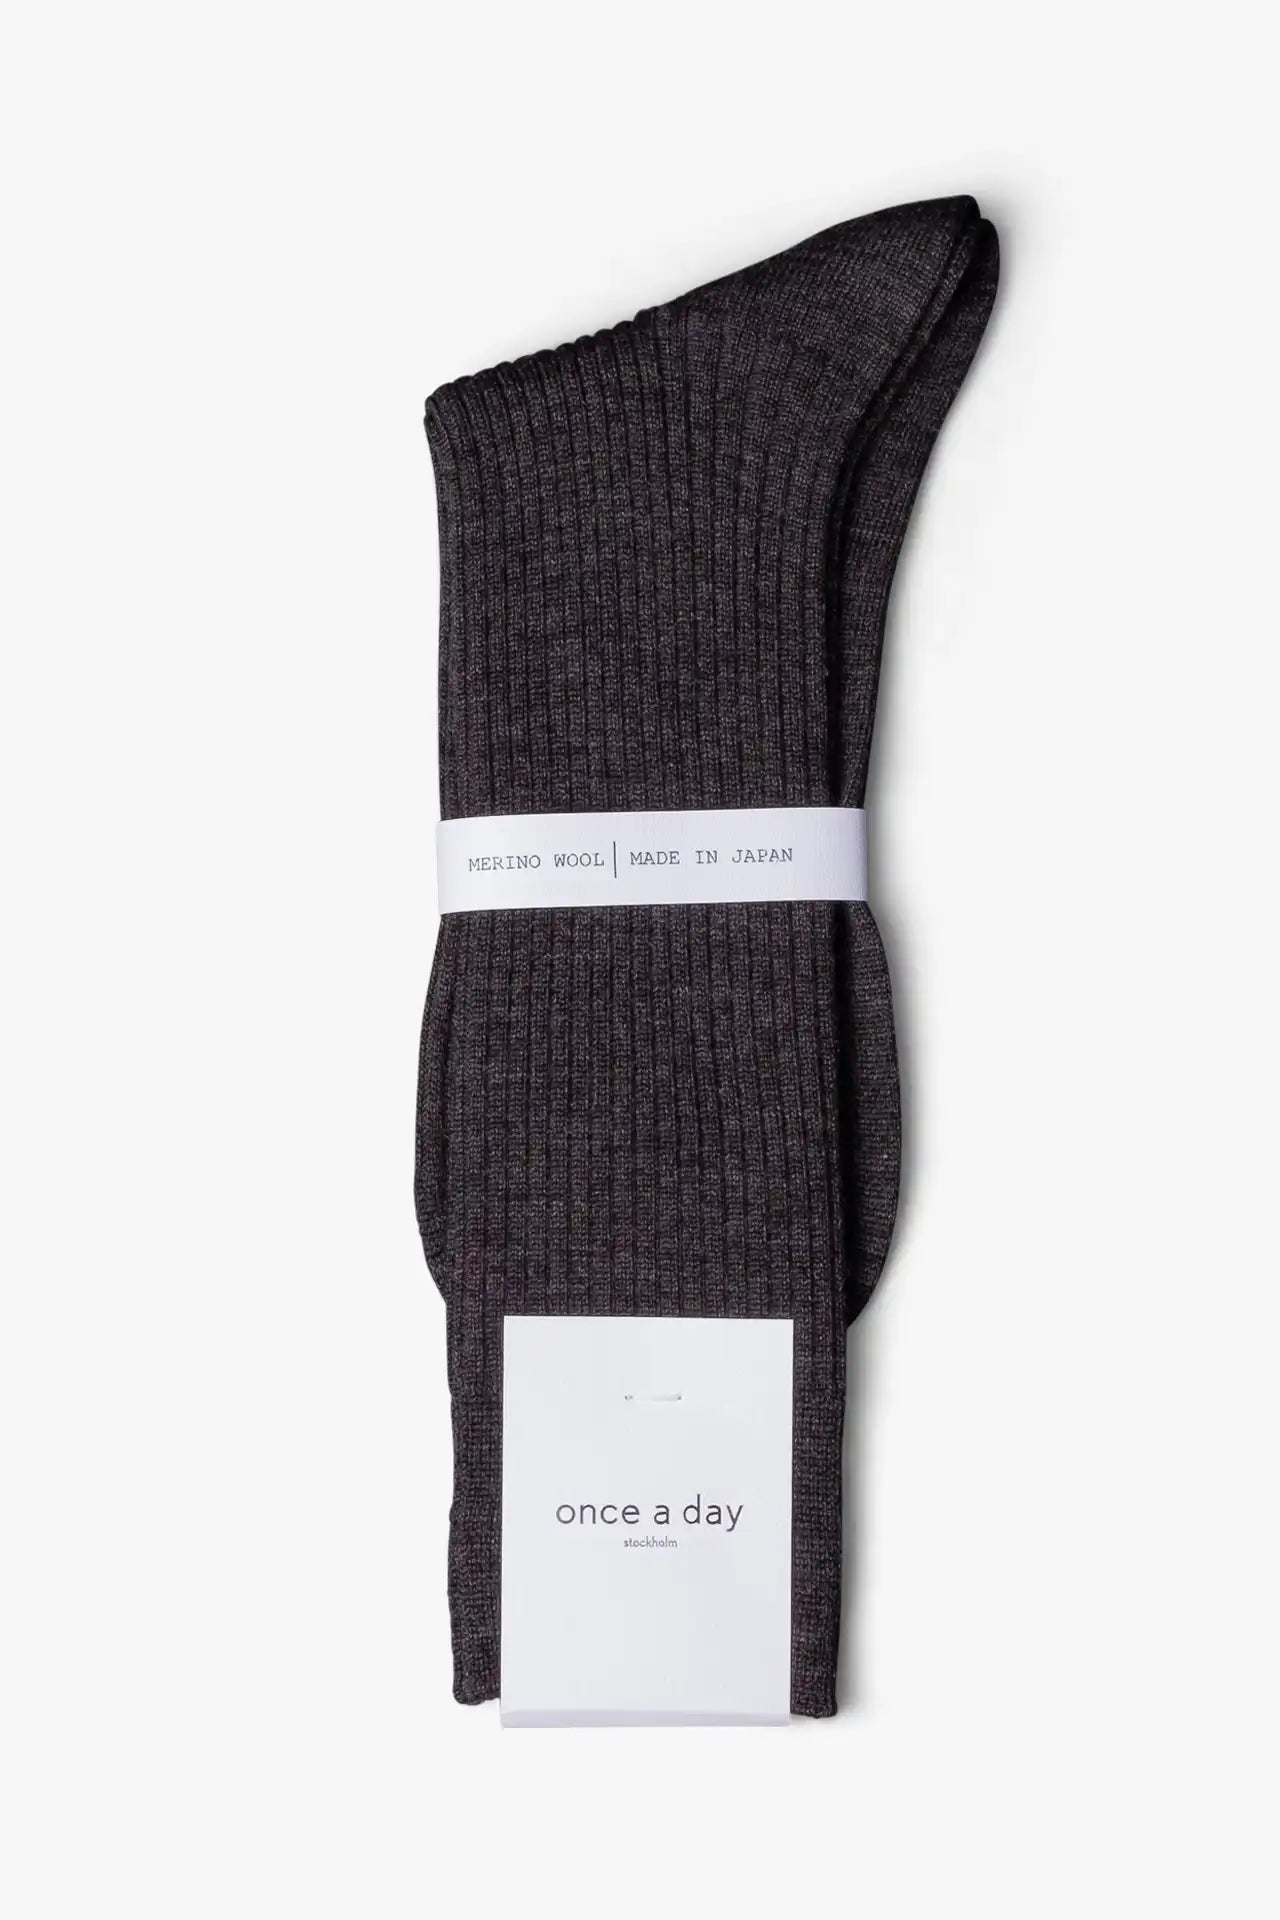 Dark gray melange dress socks in merino wool. Swedish design by once a day and produced by glenn clyde. Can we washed in warm water without shrinking.